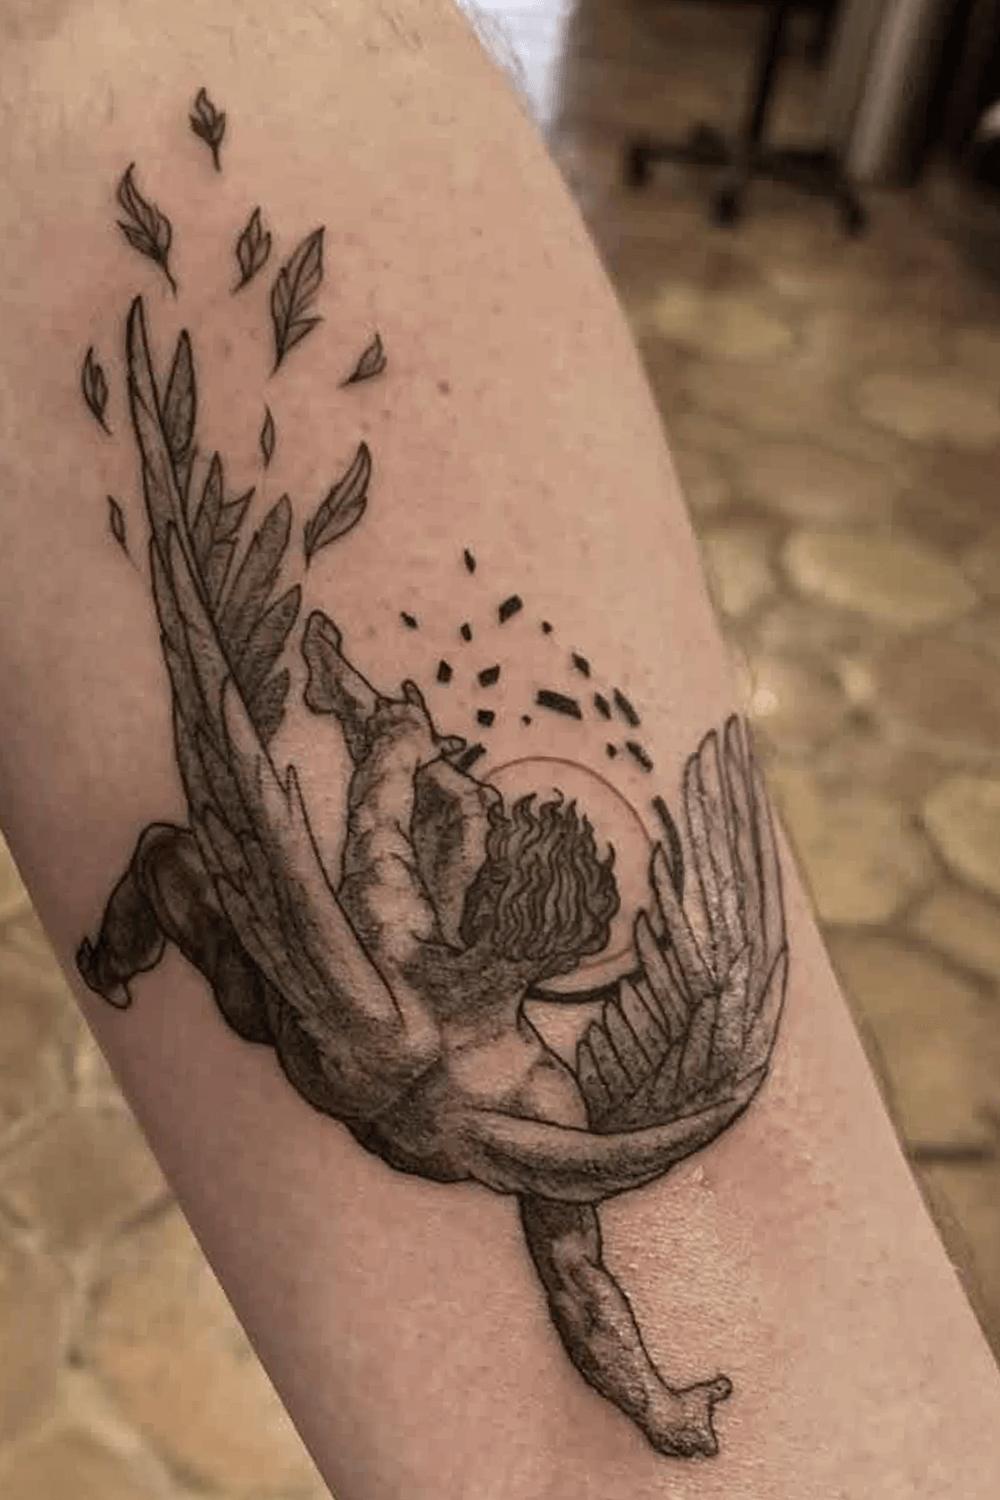 Top 10 broken wings tattoo ideas and inspiration